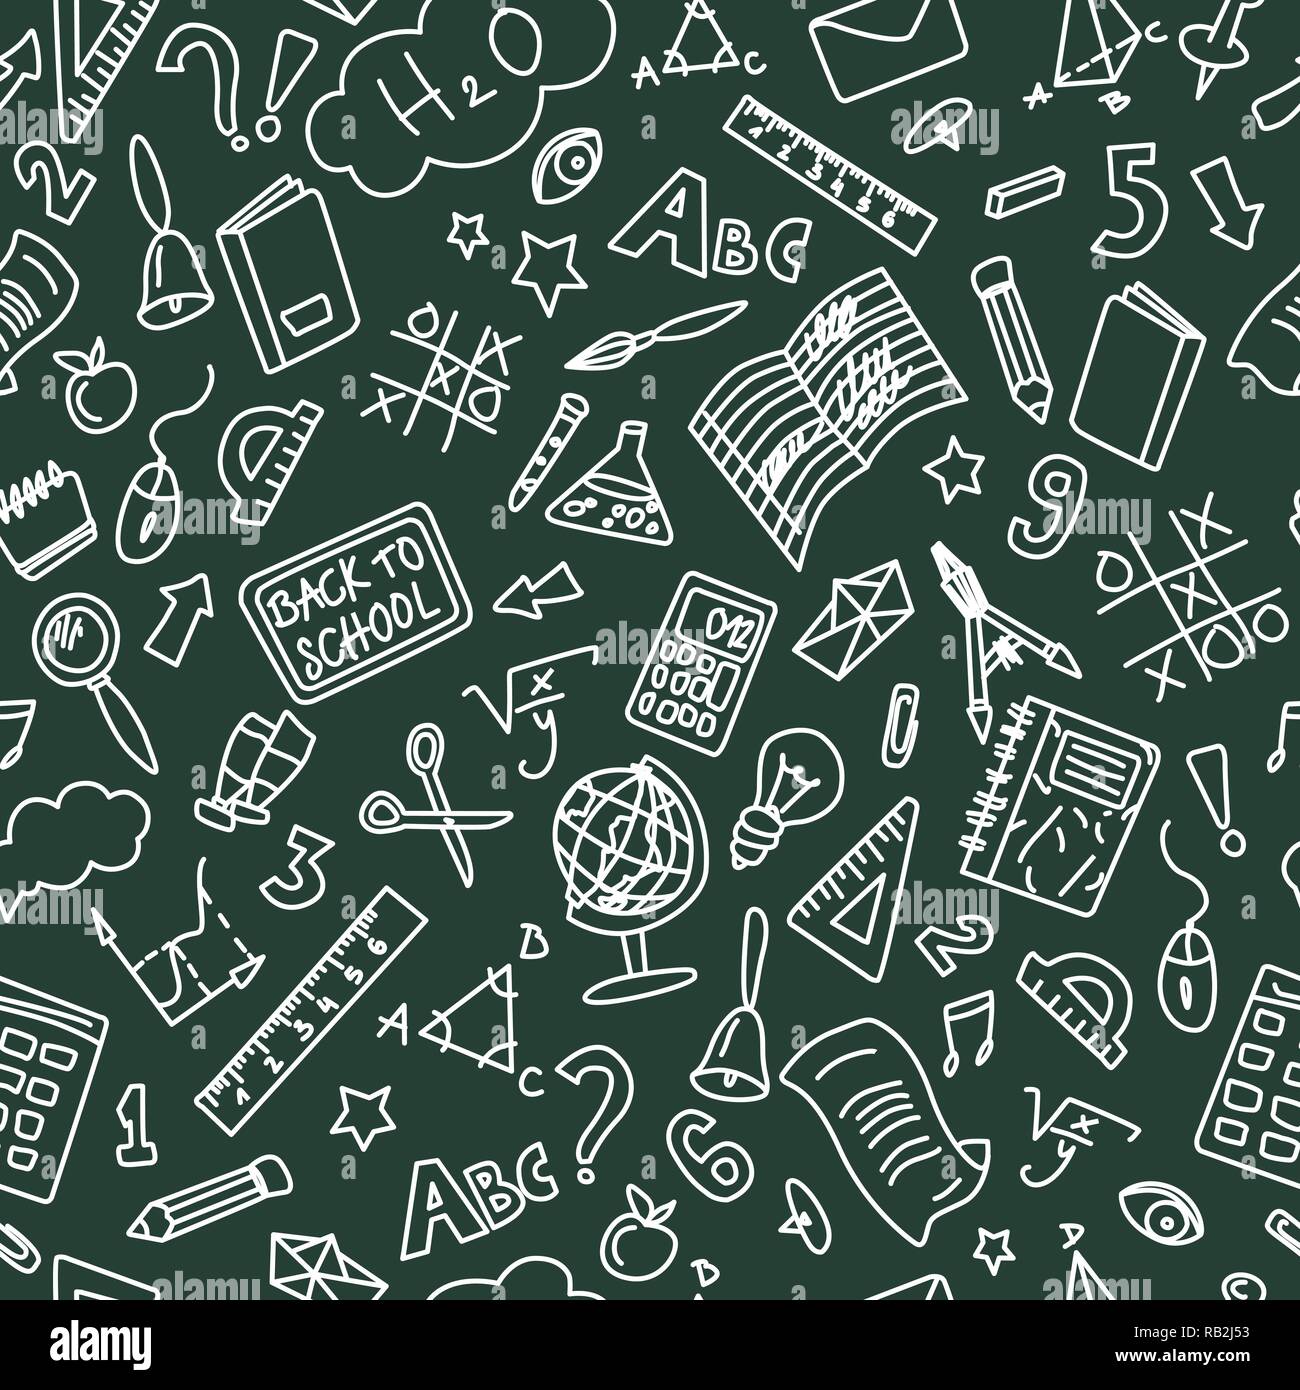 Chalkboard Back to School Doodle Seamless Pattern. Blue Ballpen Drawing on Red Line Paper. School Acessories Stock Vector